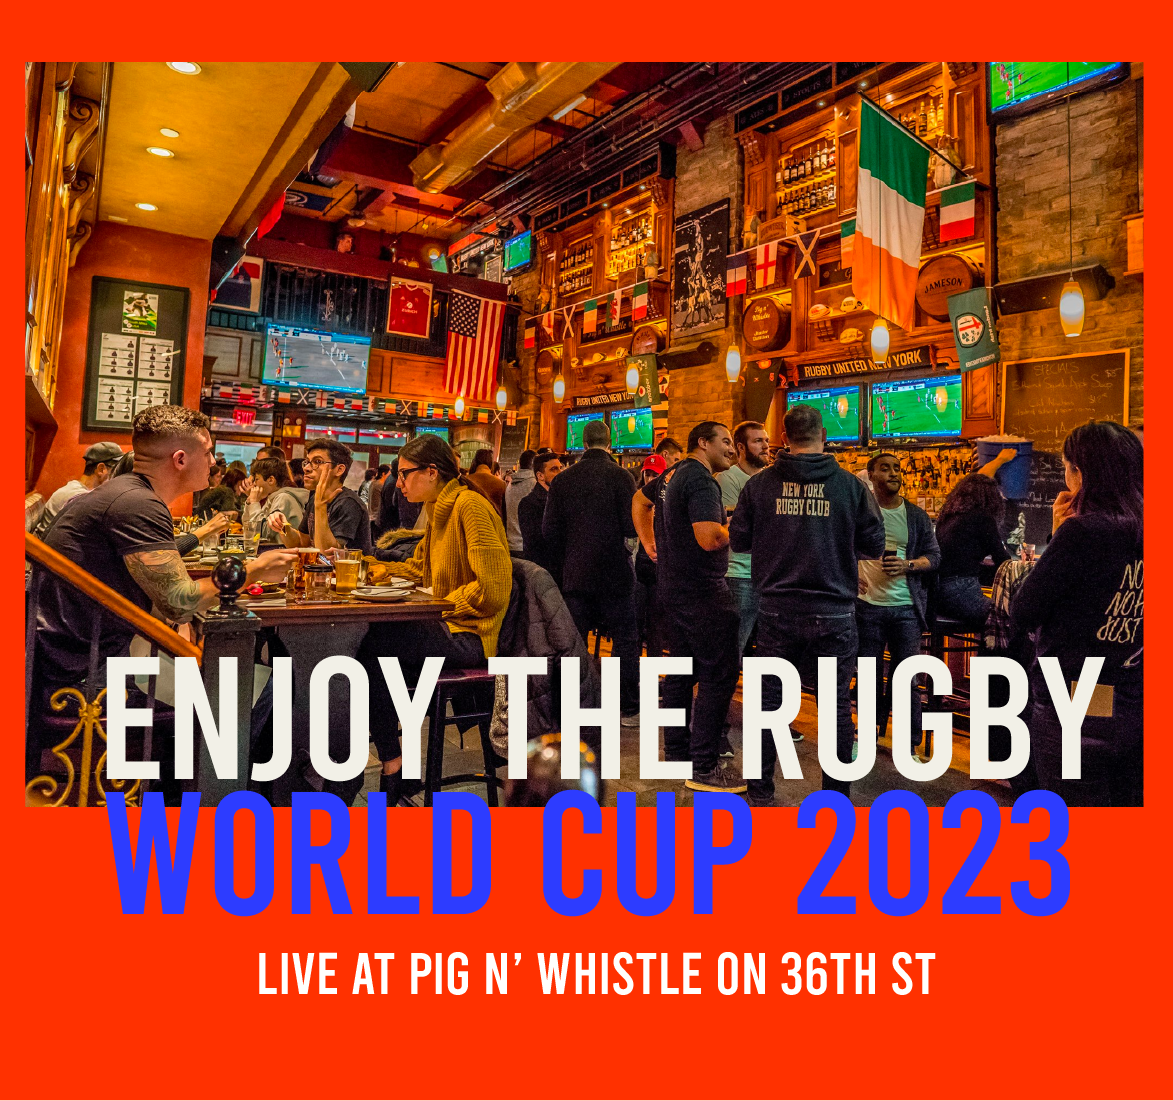 Where to Watch Rugby World Cup in NYC